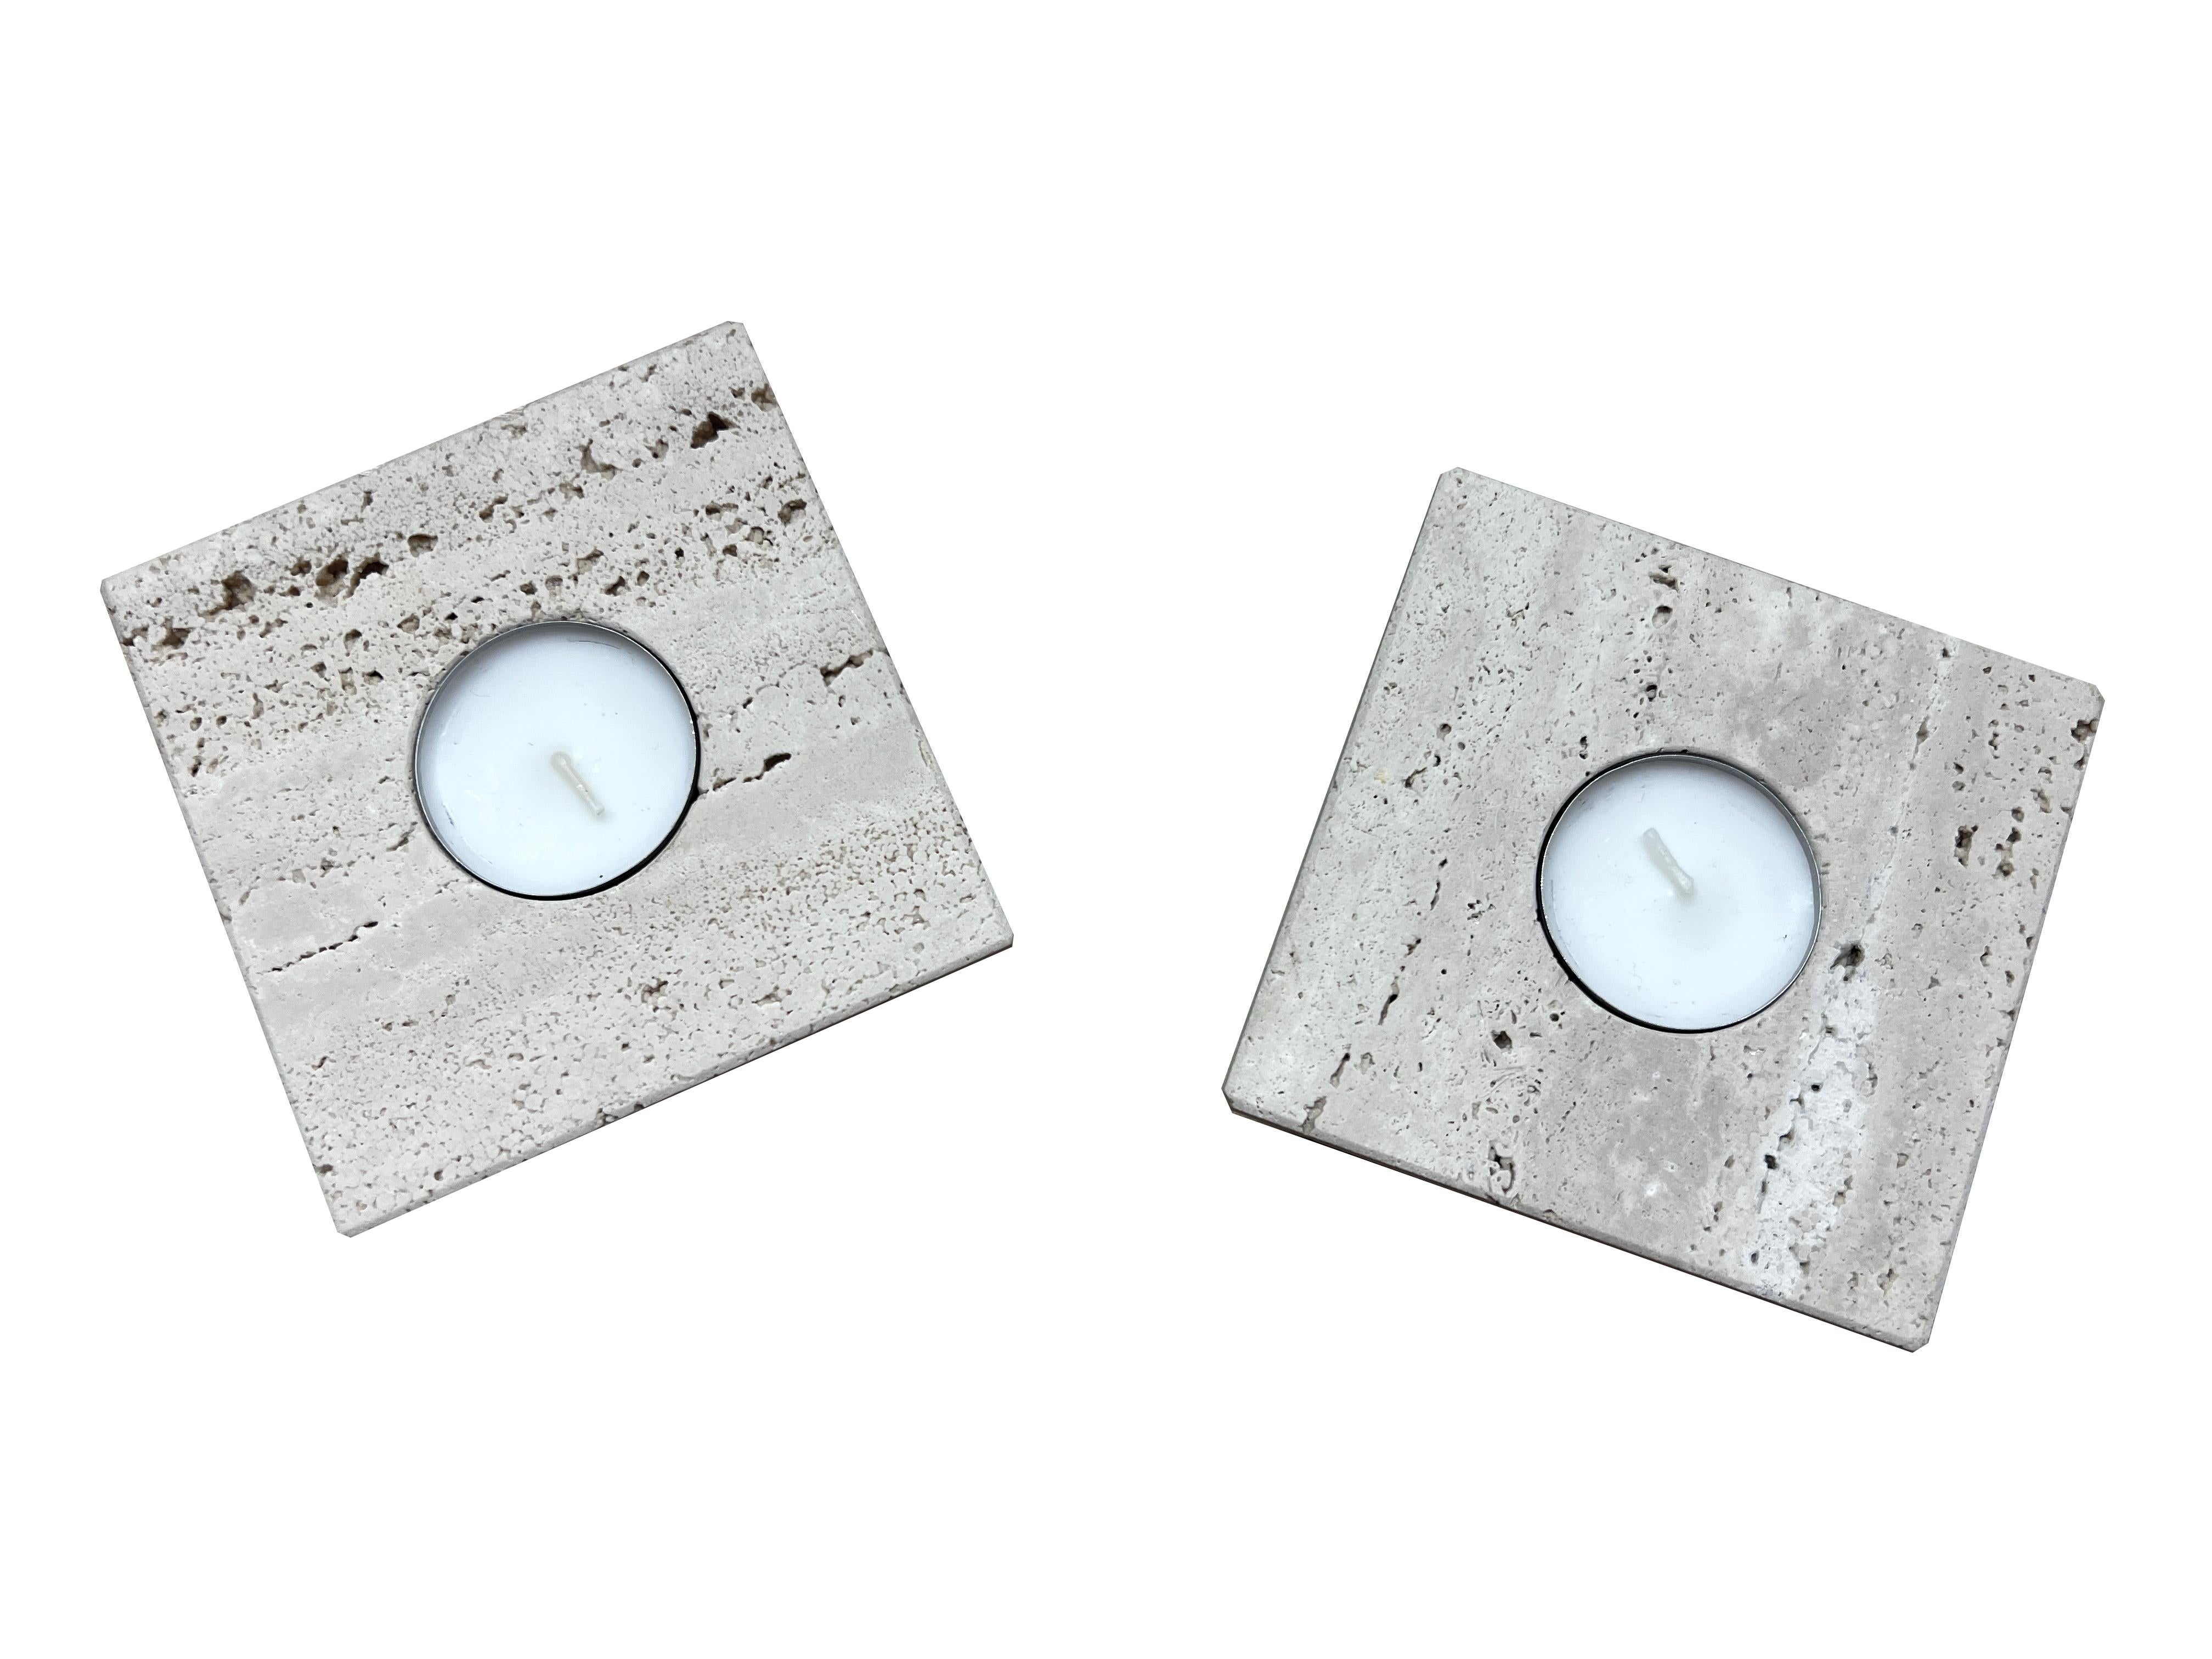 Spanish Candleholders Marble Travertine Design Set Two Candle Holders Mother’s Day Gift For Sale